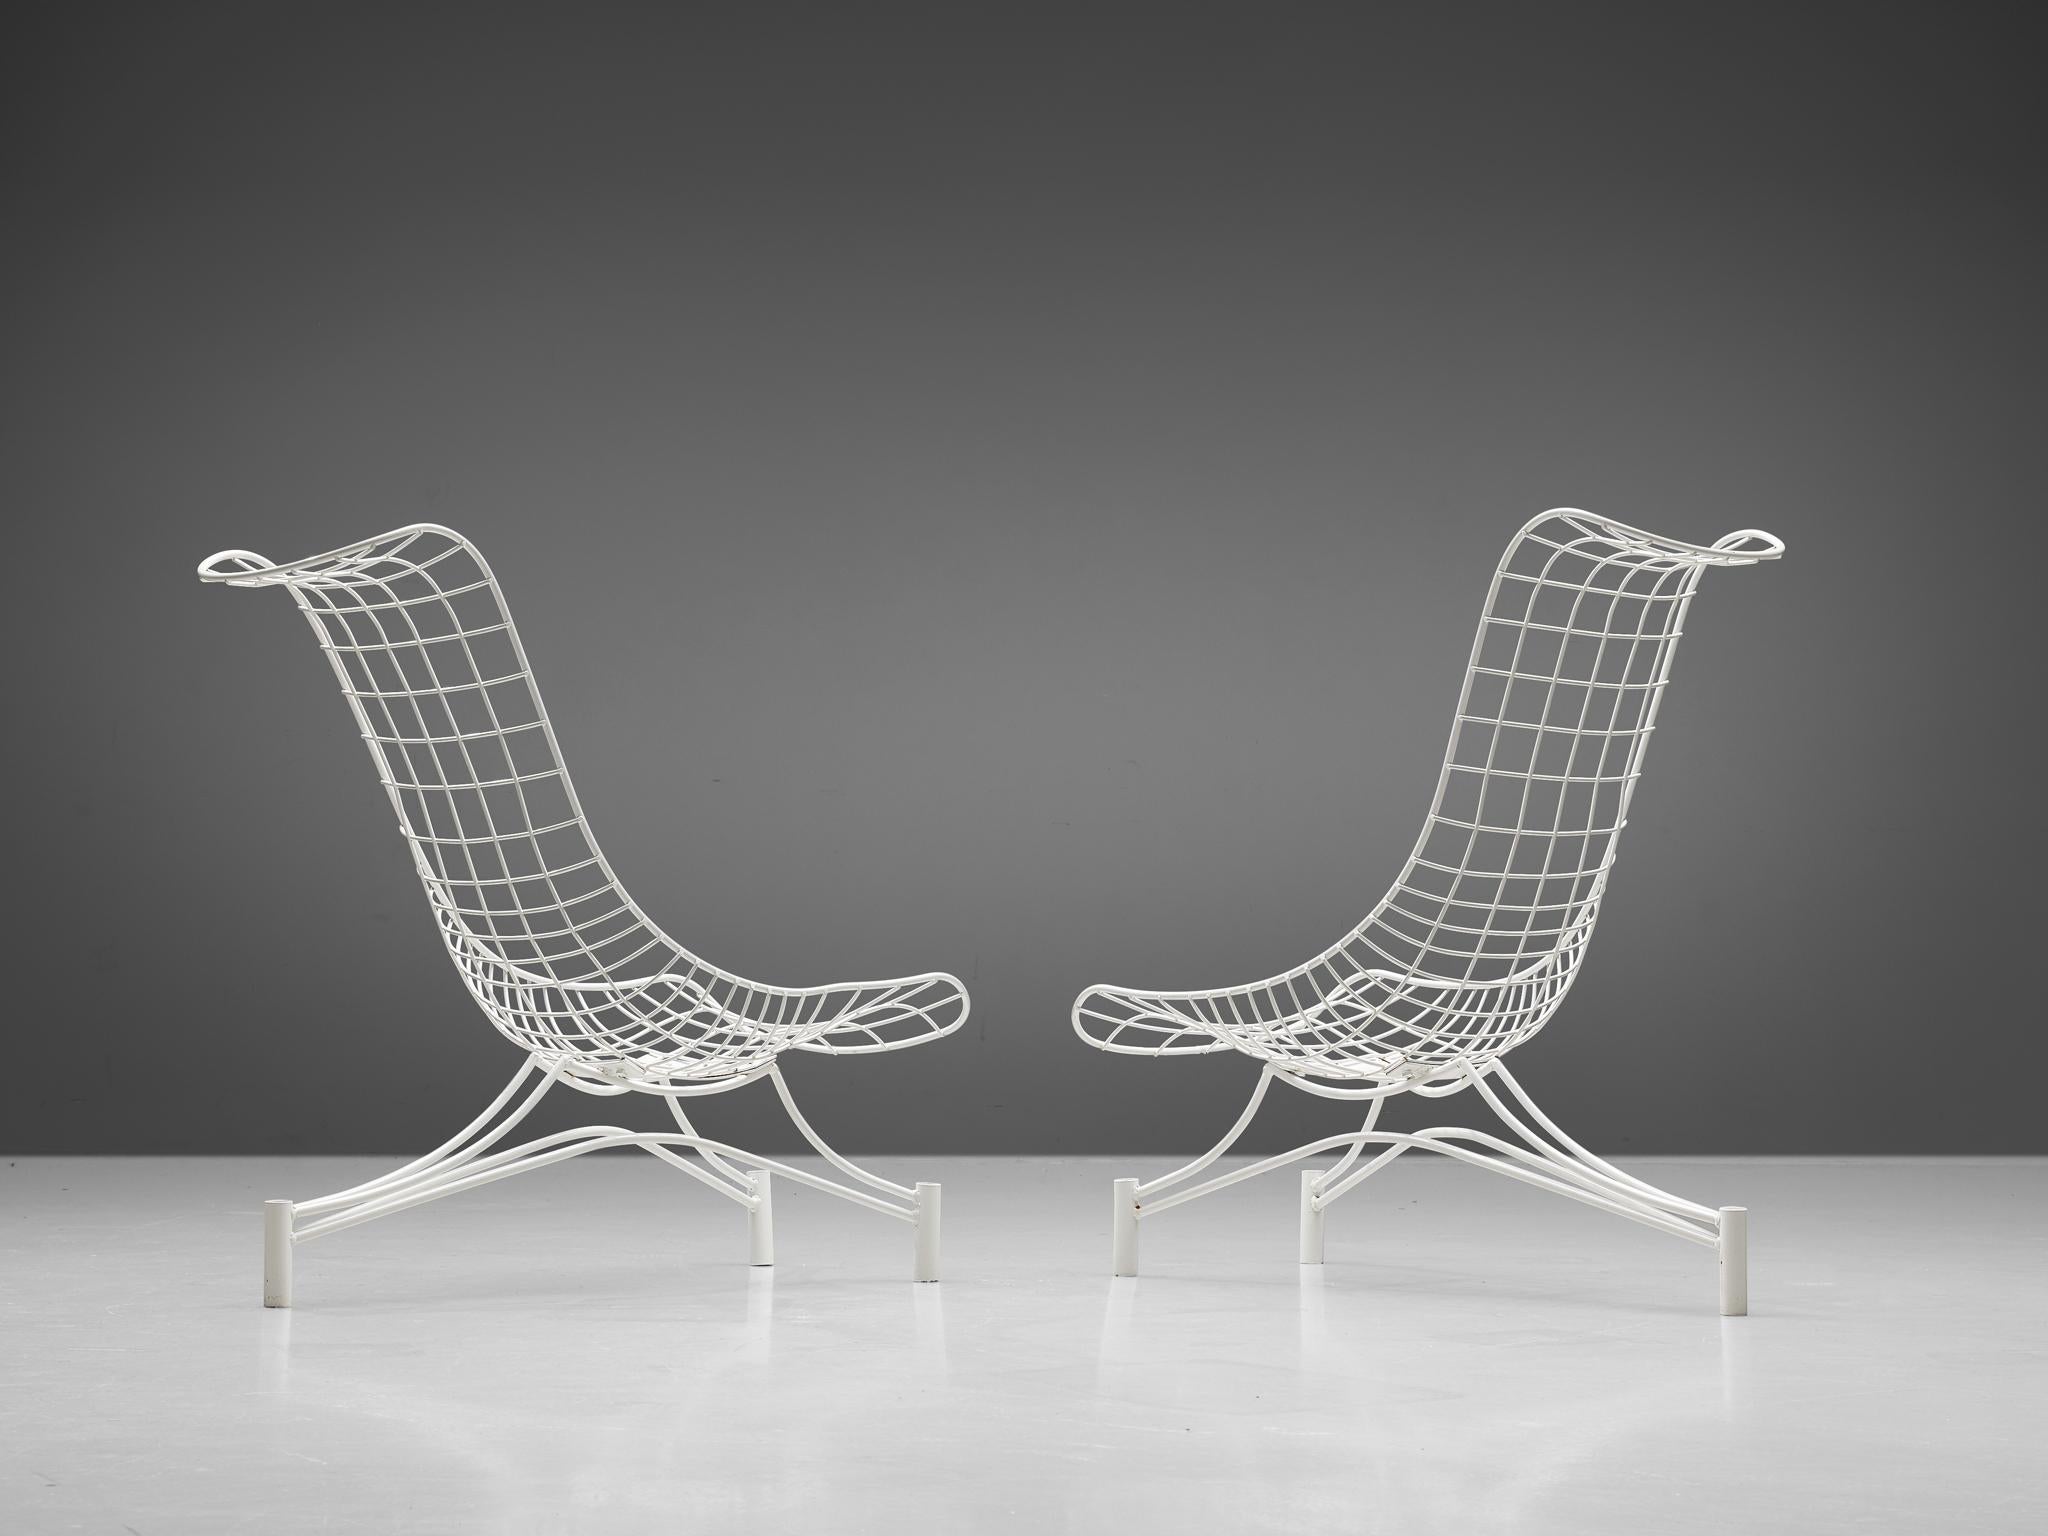 Vladimir Kagan, pair of 'Capricorn' garden lounge chairs, lacquered metal, United States, 1950s.

These metal garden loungers are designed by the iconic designer Vladimir Kagan. The shape of the seat is shows elegant curves. They features